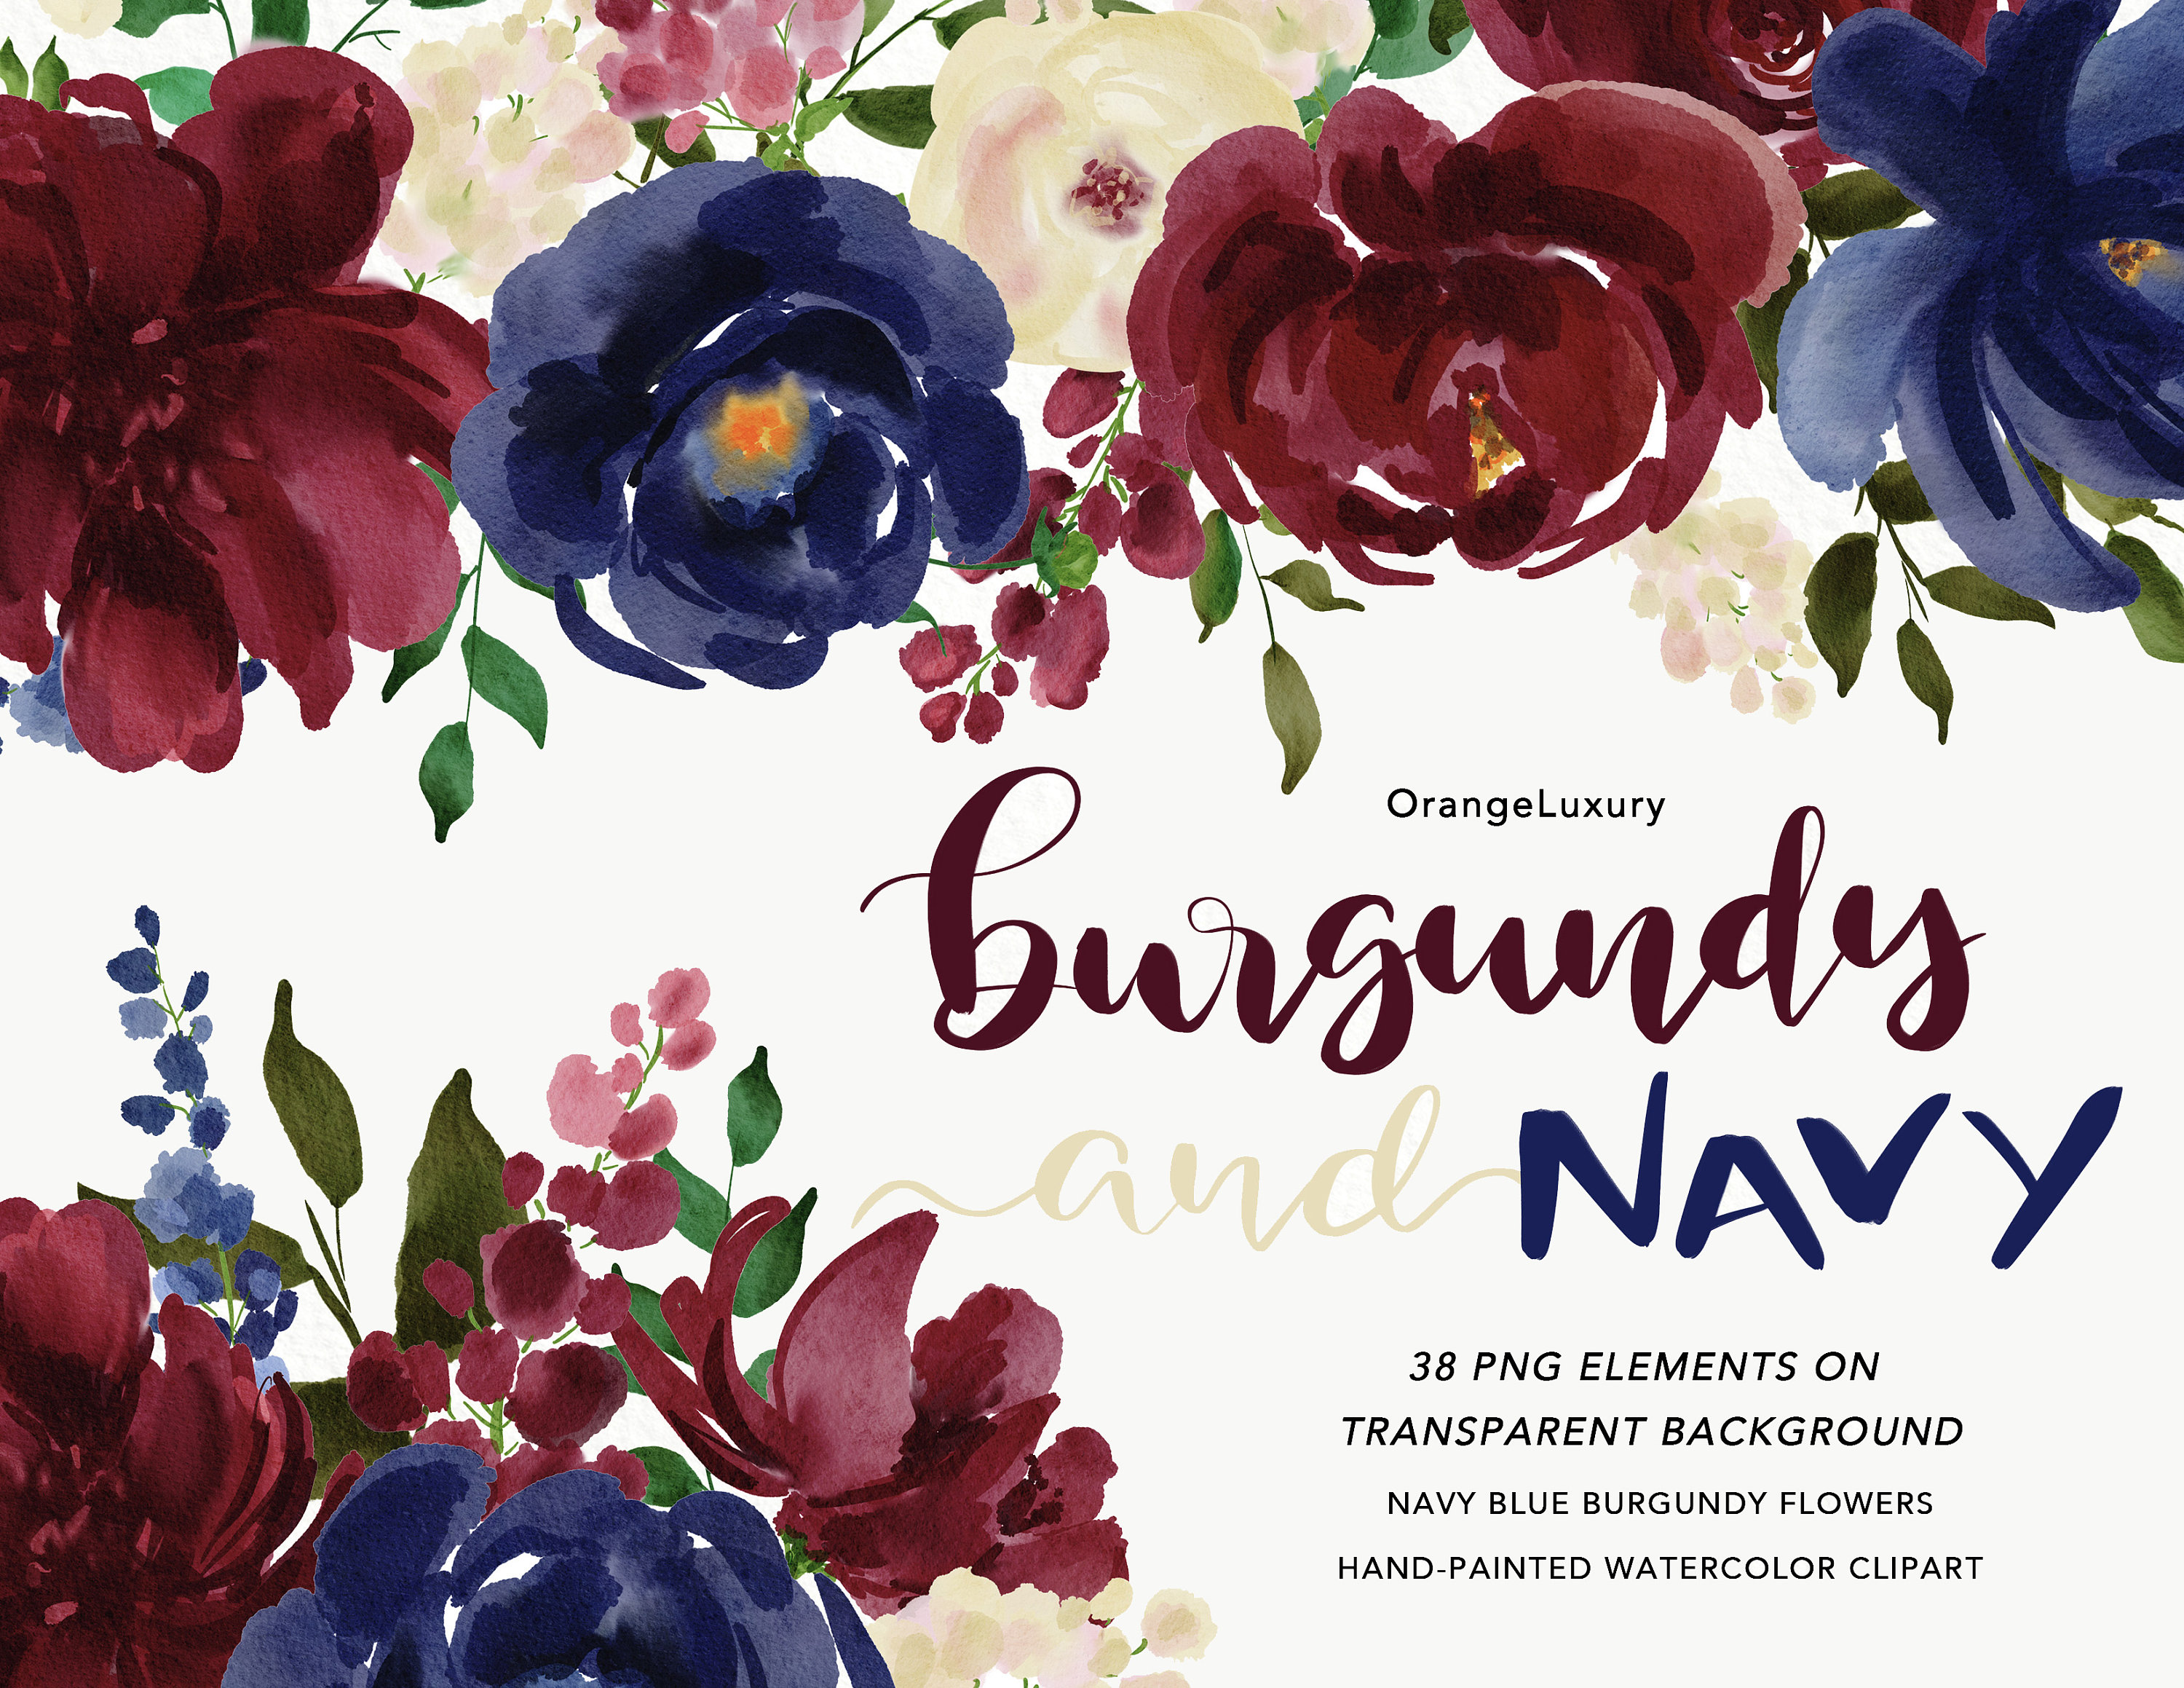 Bridal flowers invitation clip art Colorful  navy and burgundy floral watercolor wedding bouquets clip art Wedding decoration elements.